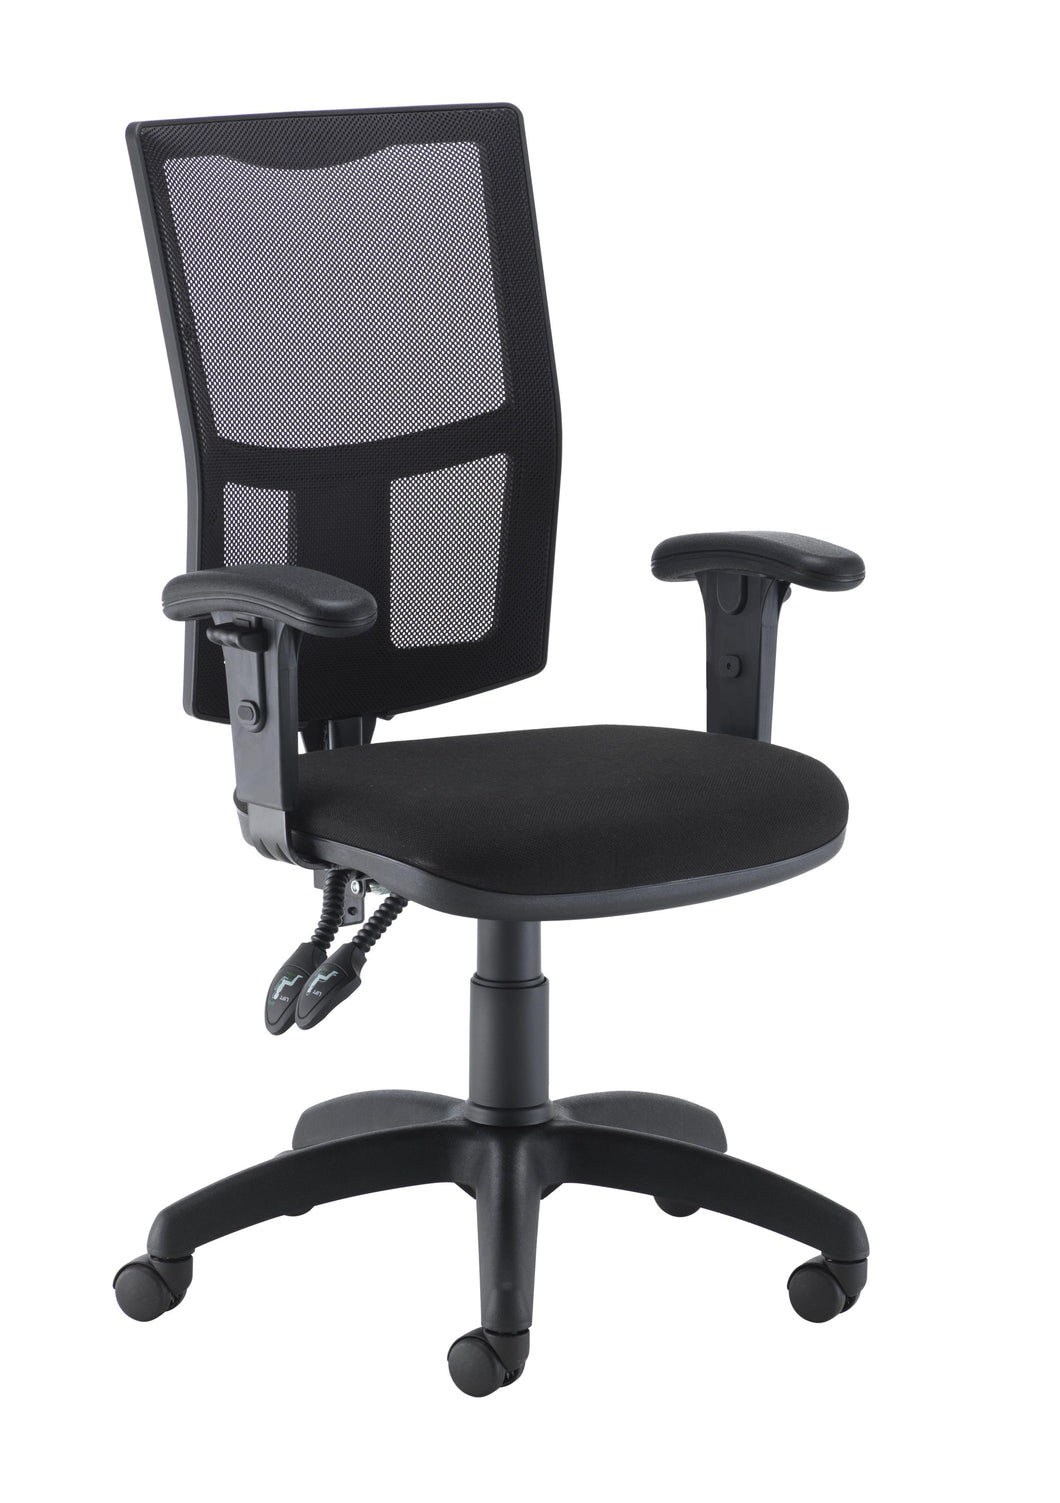 Calypso 2 Mesh Office Chair with Adjustable Arms | Black